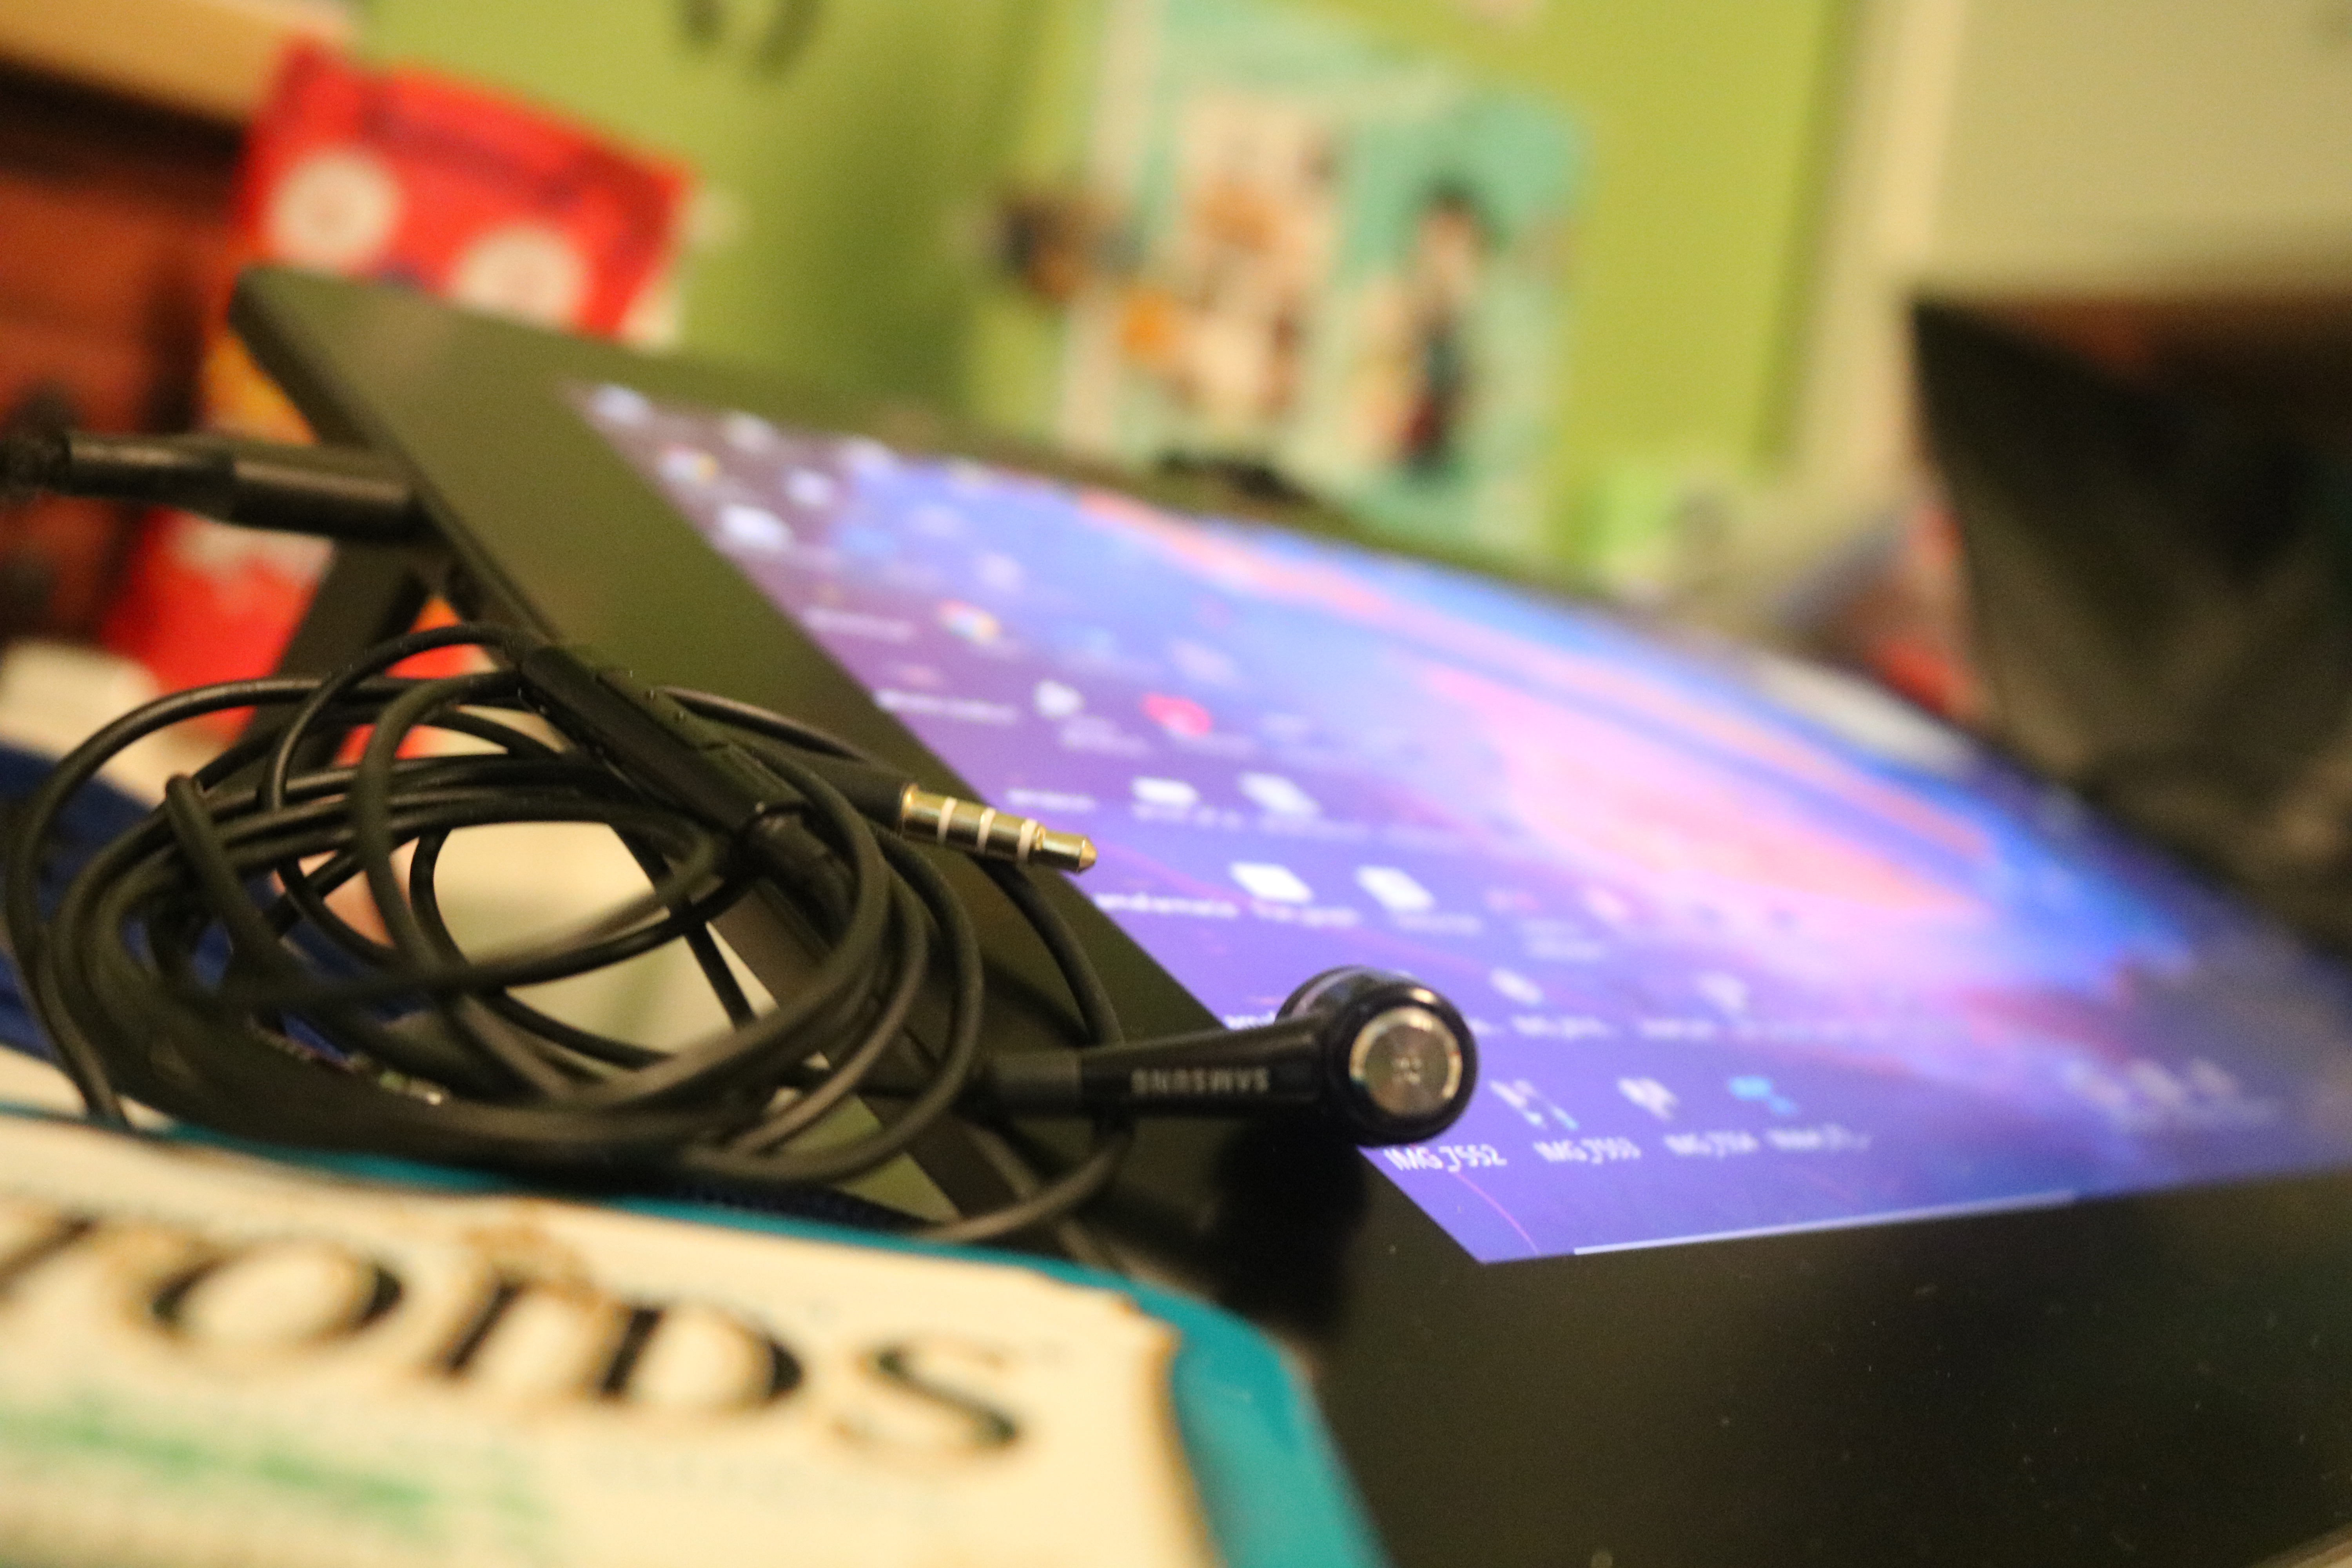 This photo describes all of my passions, and showcases a tin of Altoids, earbuds, and a drawing tablet.